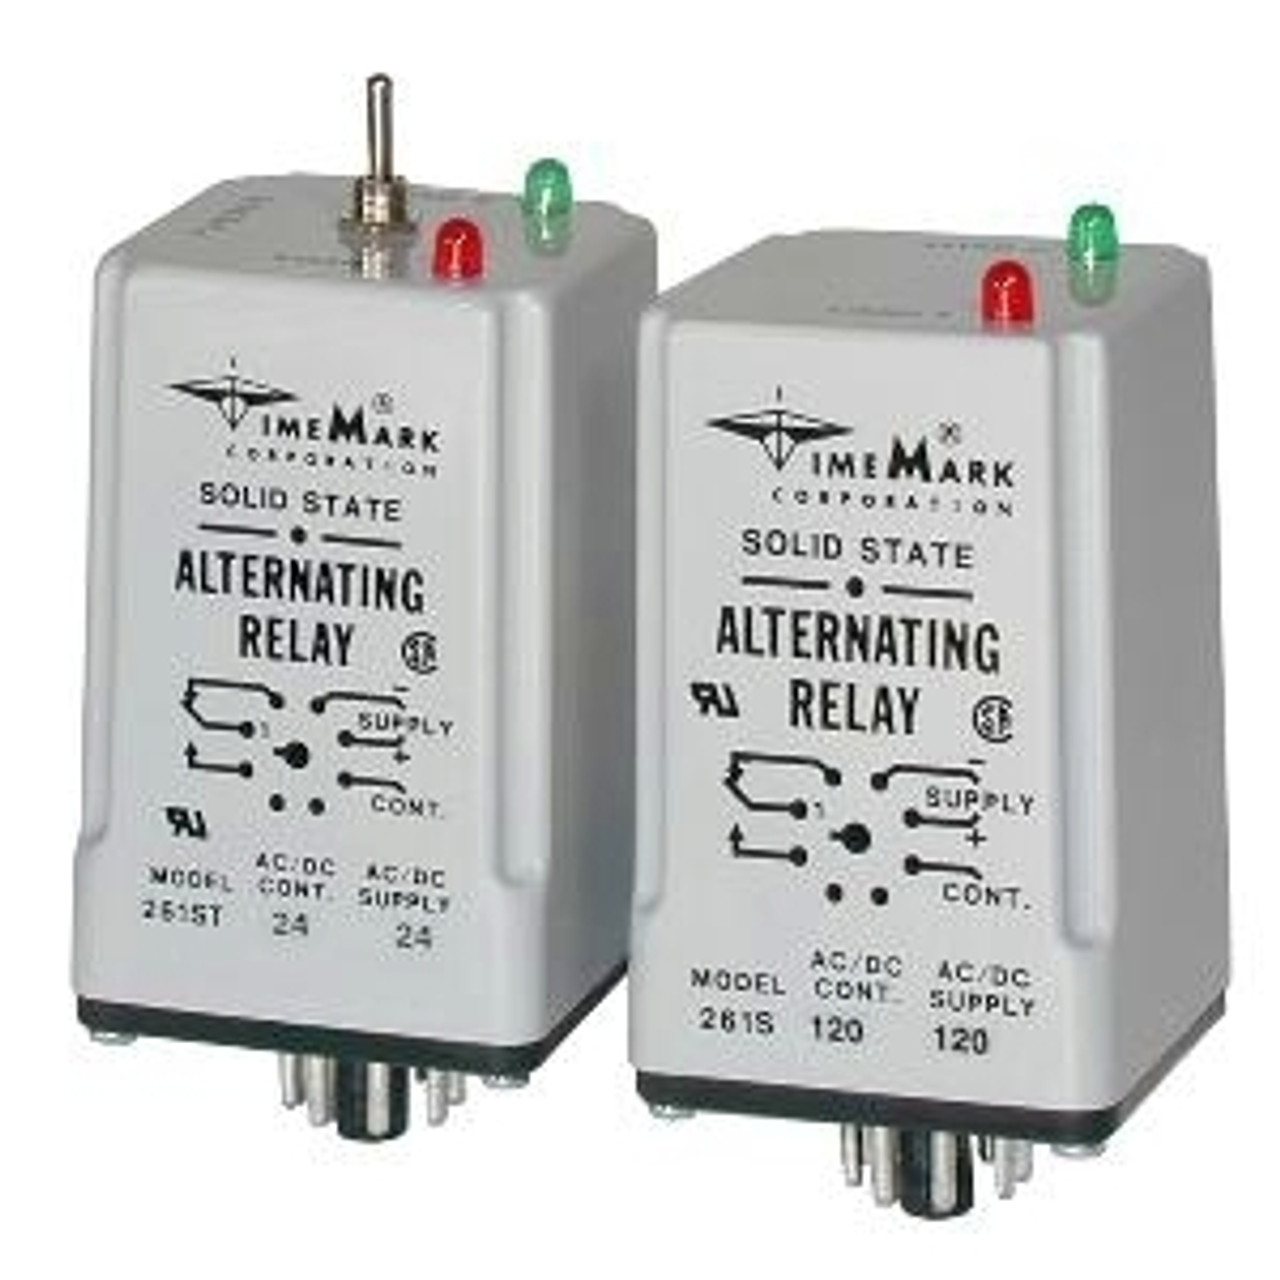 TimeMark 261-S-240 Alternating Sequencing Relay